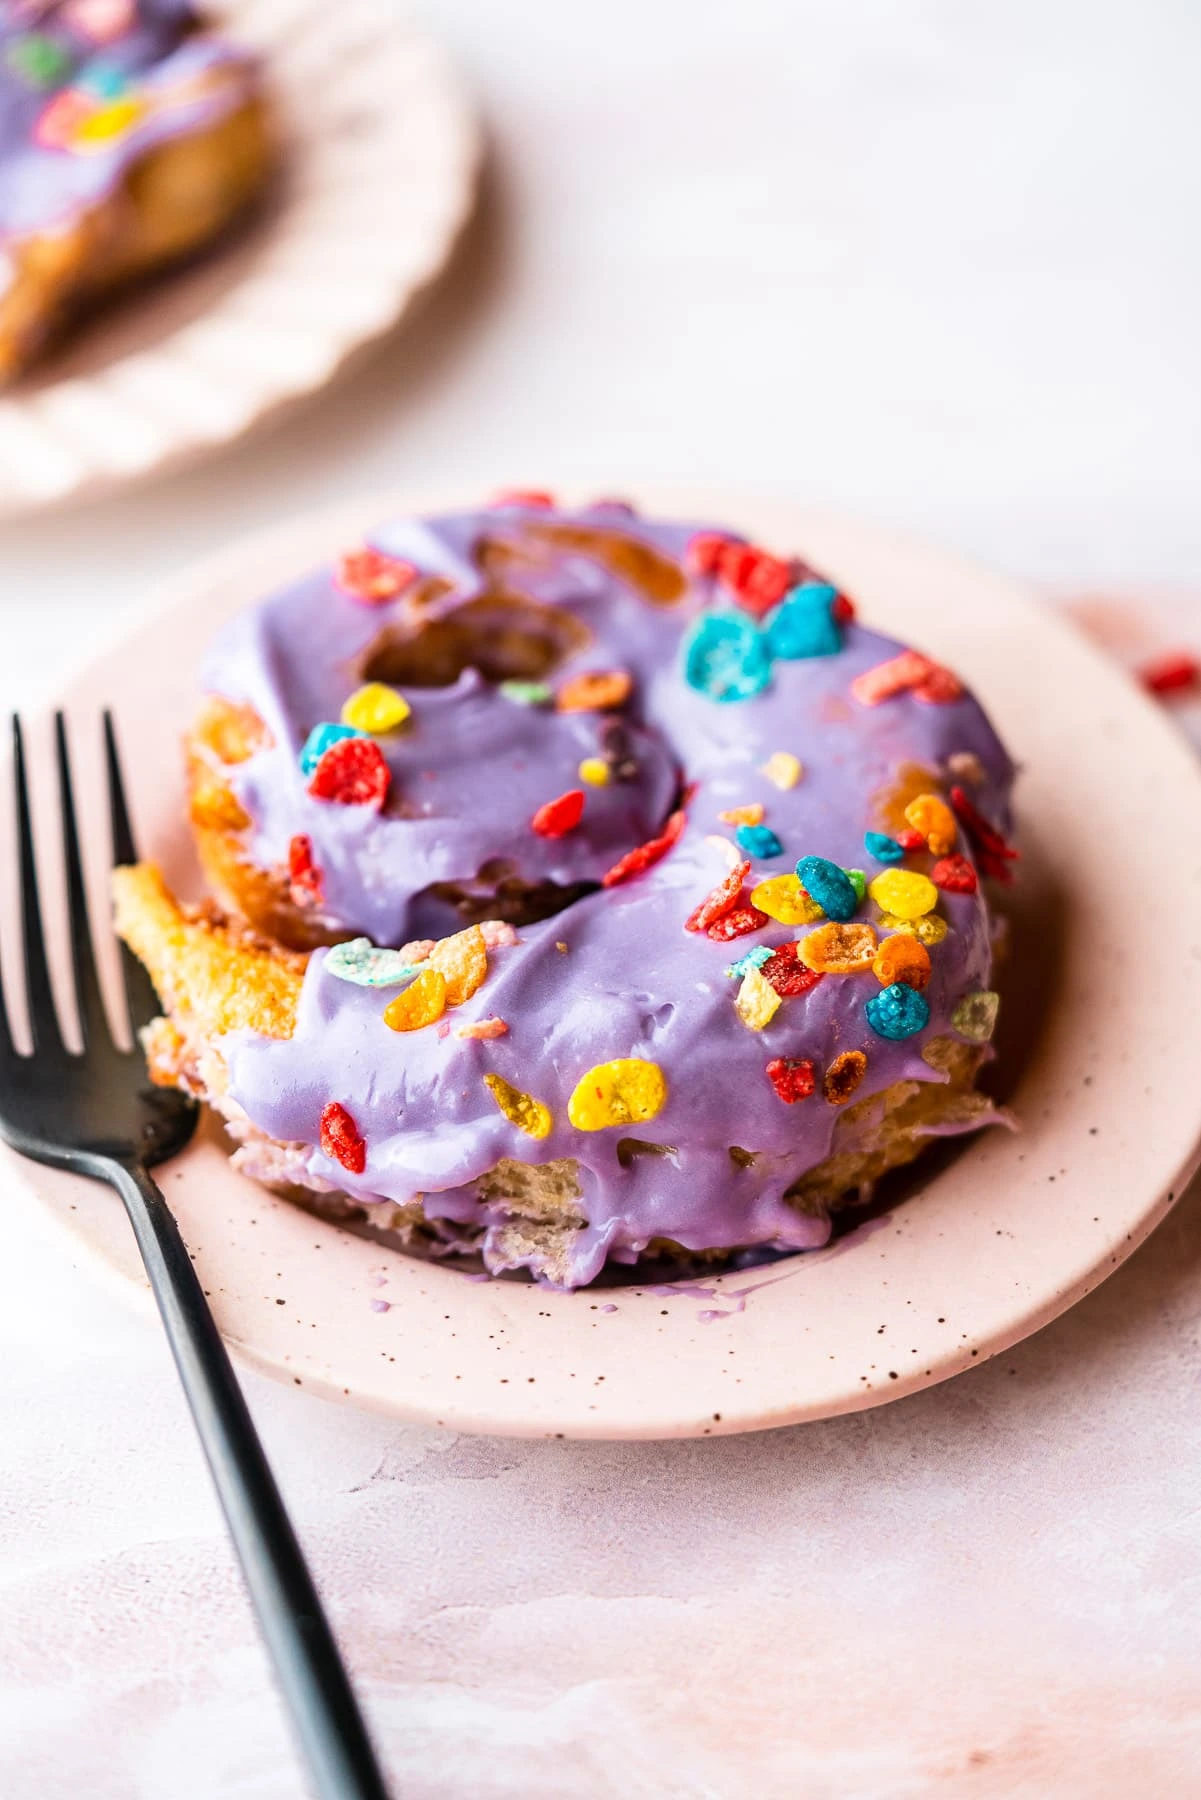 Cinnamon Roll with purple frosting and colorful pebbles, served on a plate